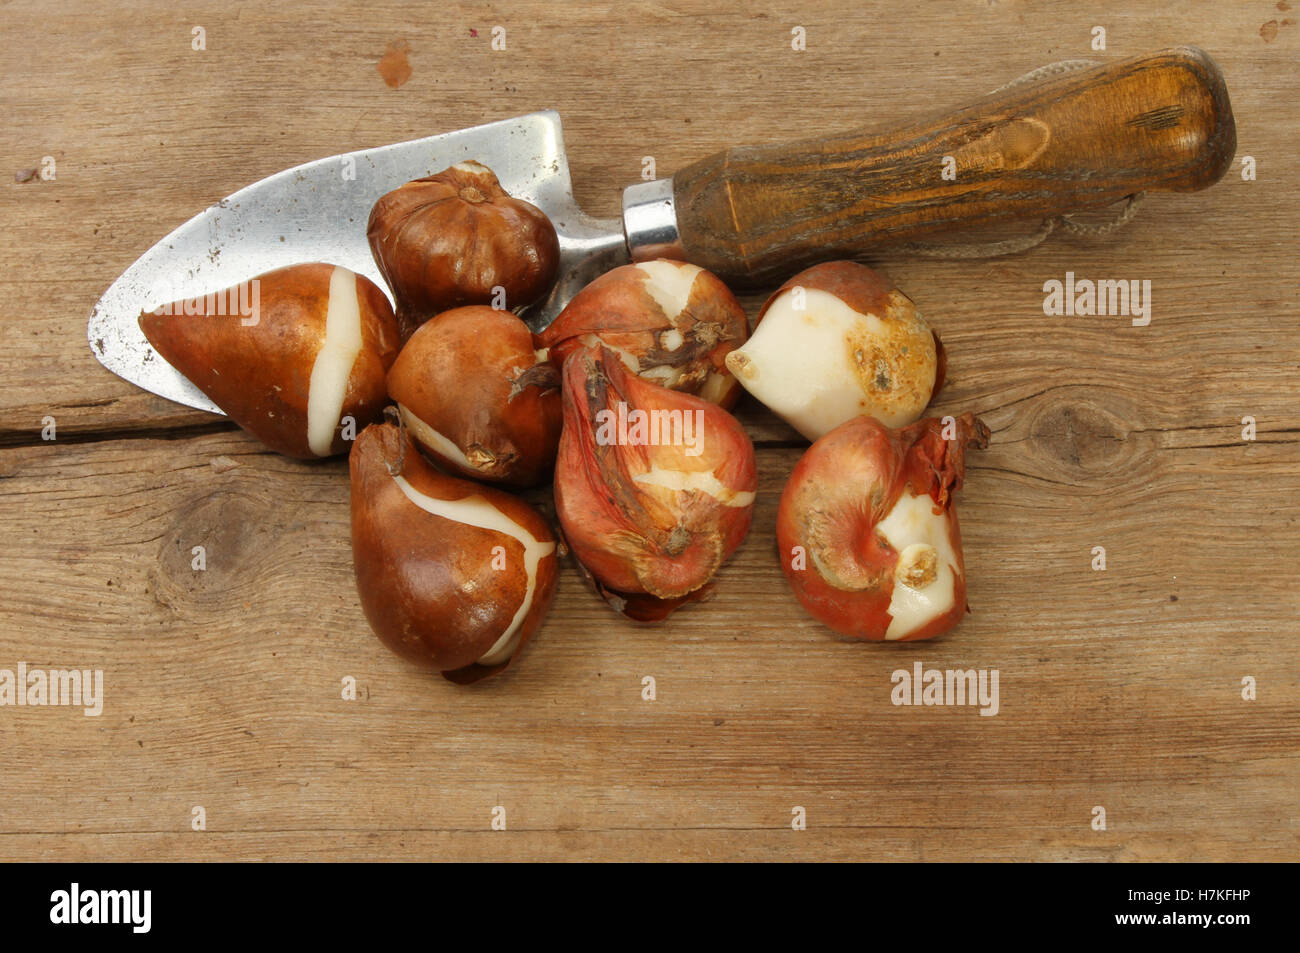 Tulip bulbs and a garden trowel on old weathered wood Stock Photo